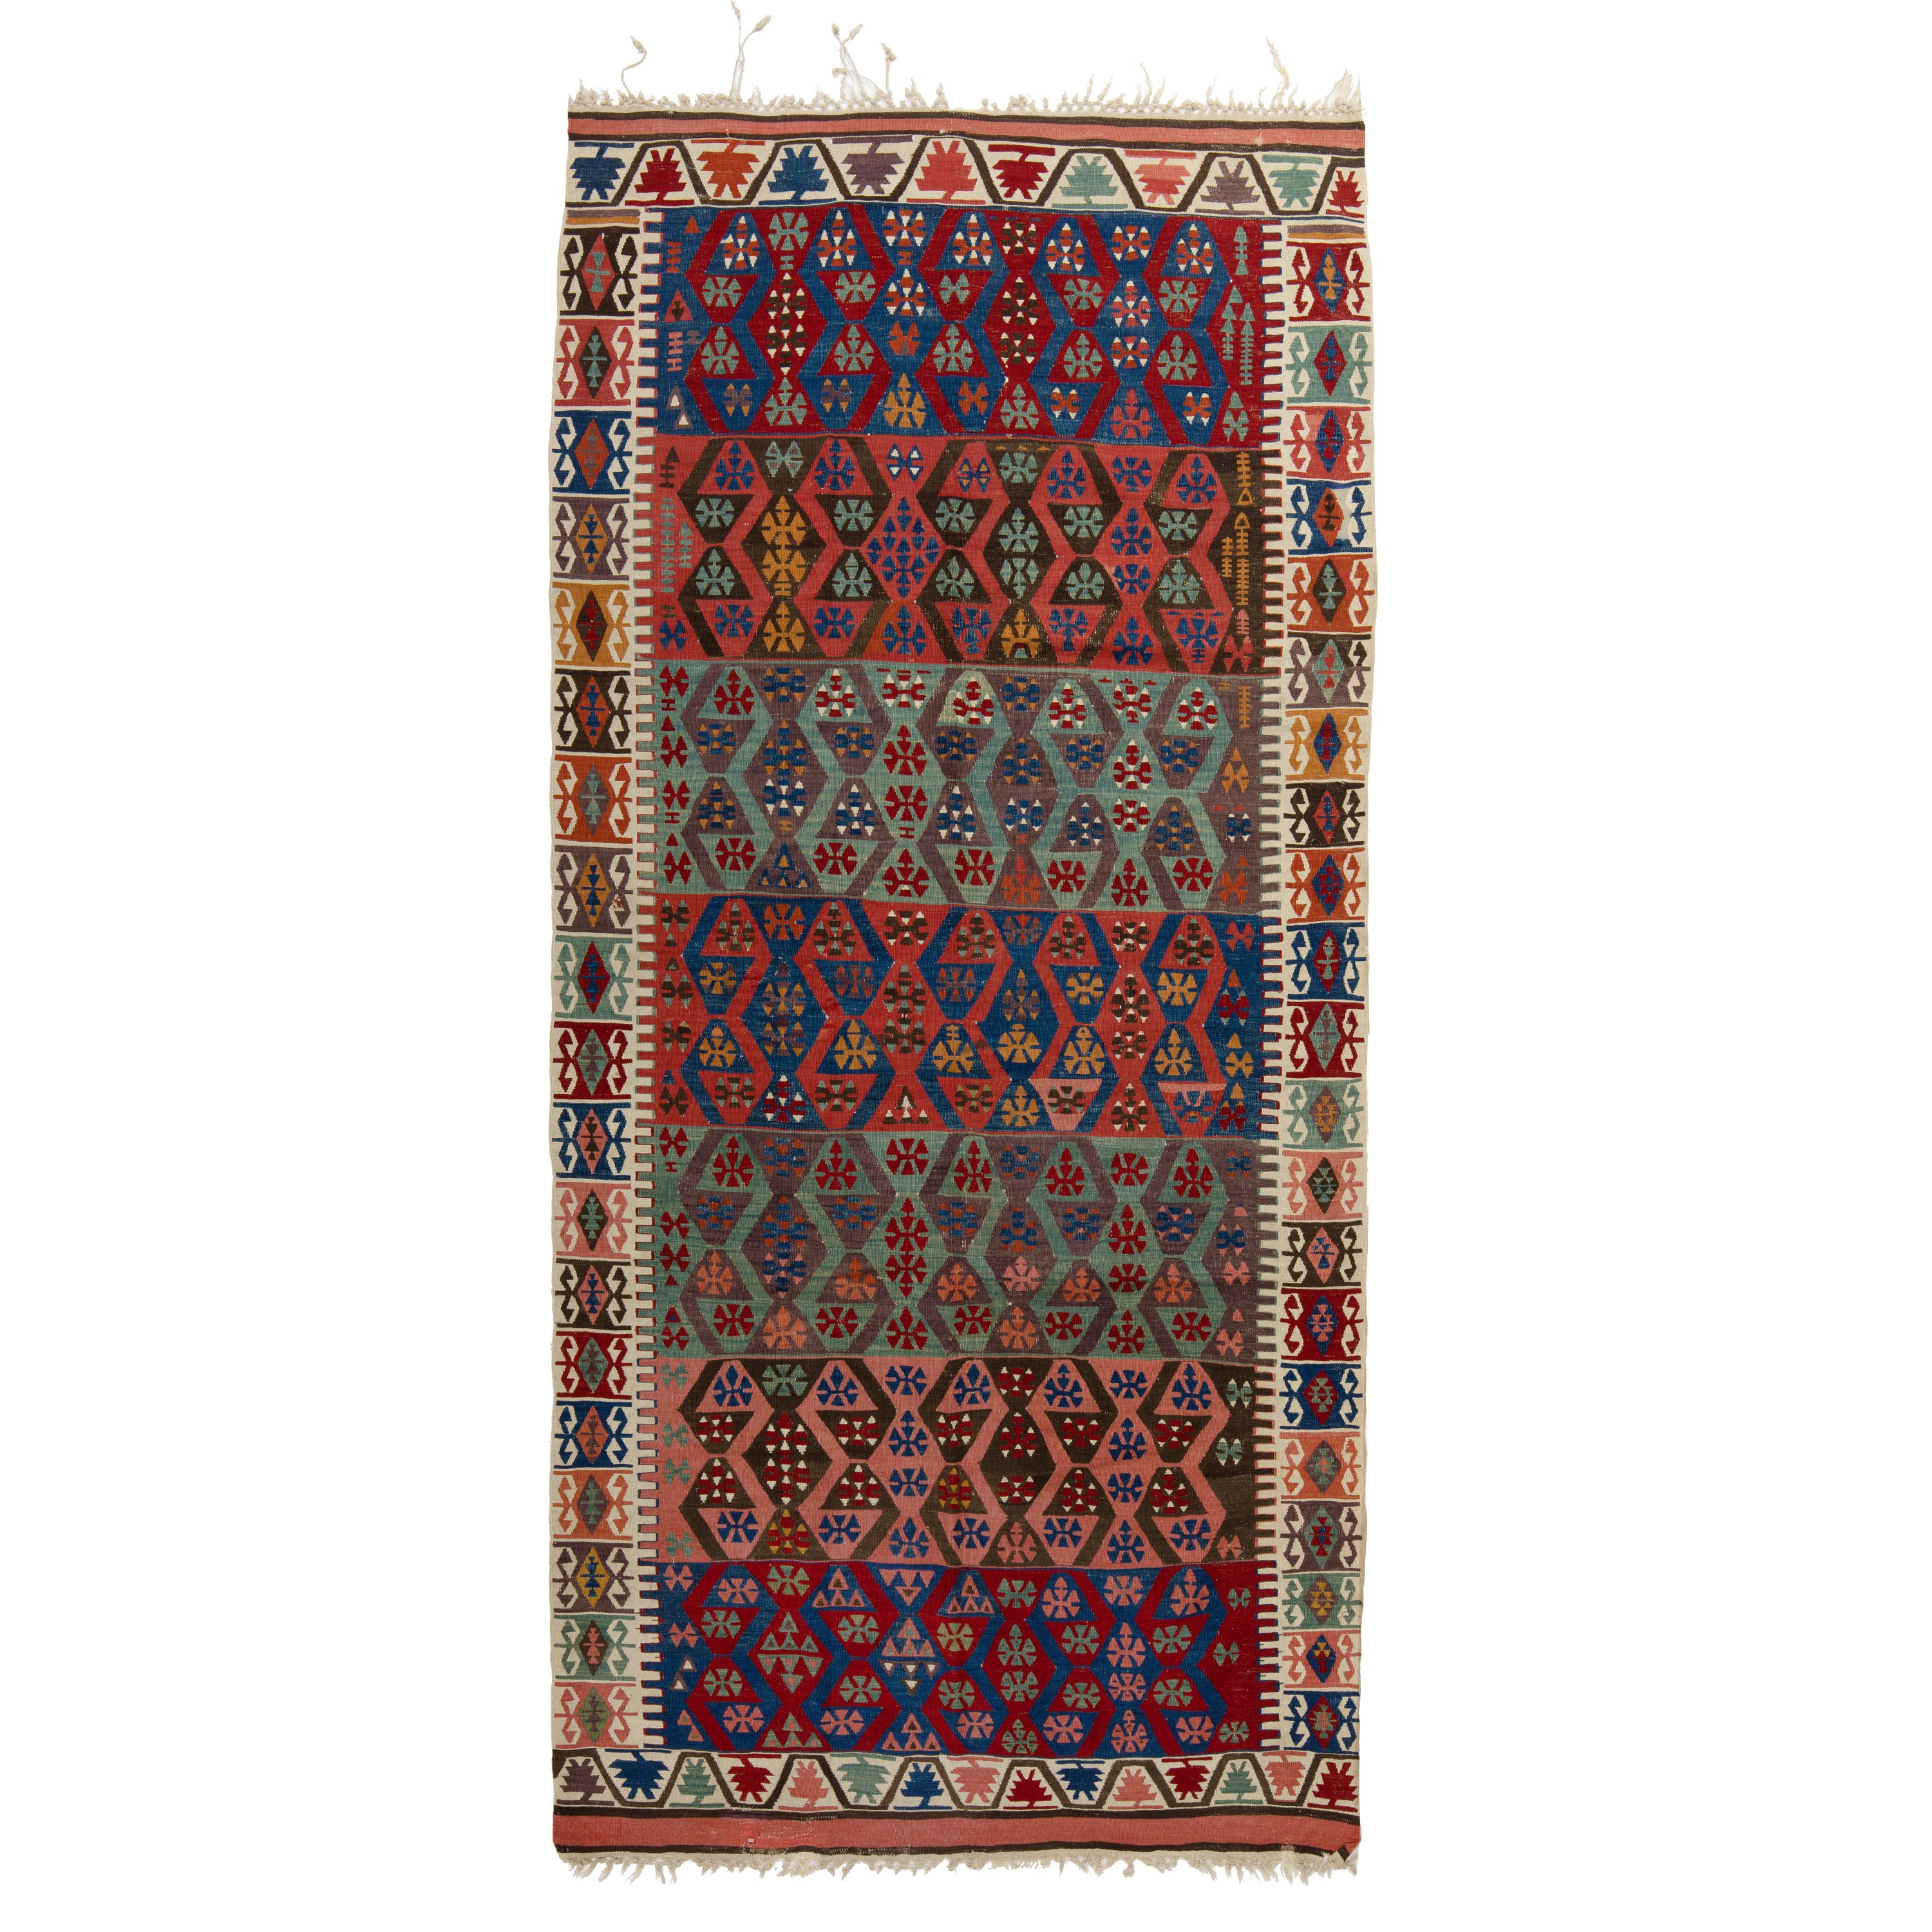 Red and Green Traditional Alyosha Wool Rug - 4'11" x 11'2"